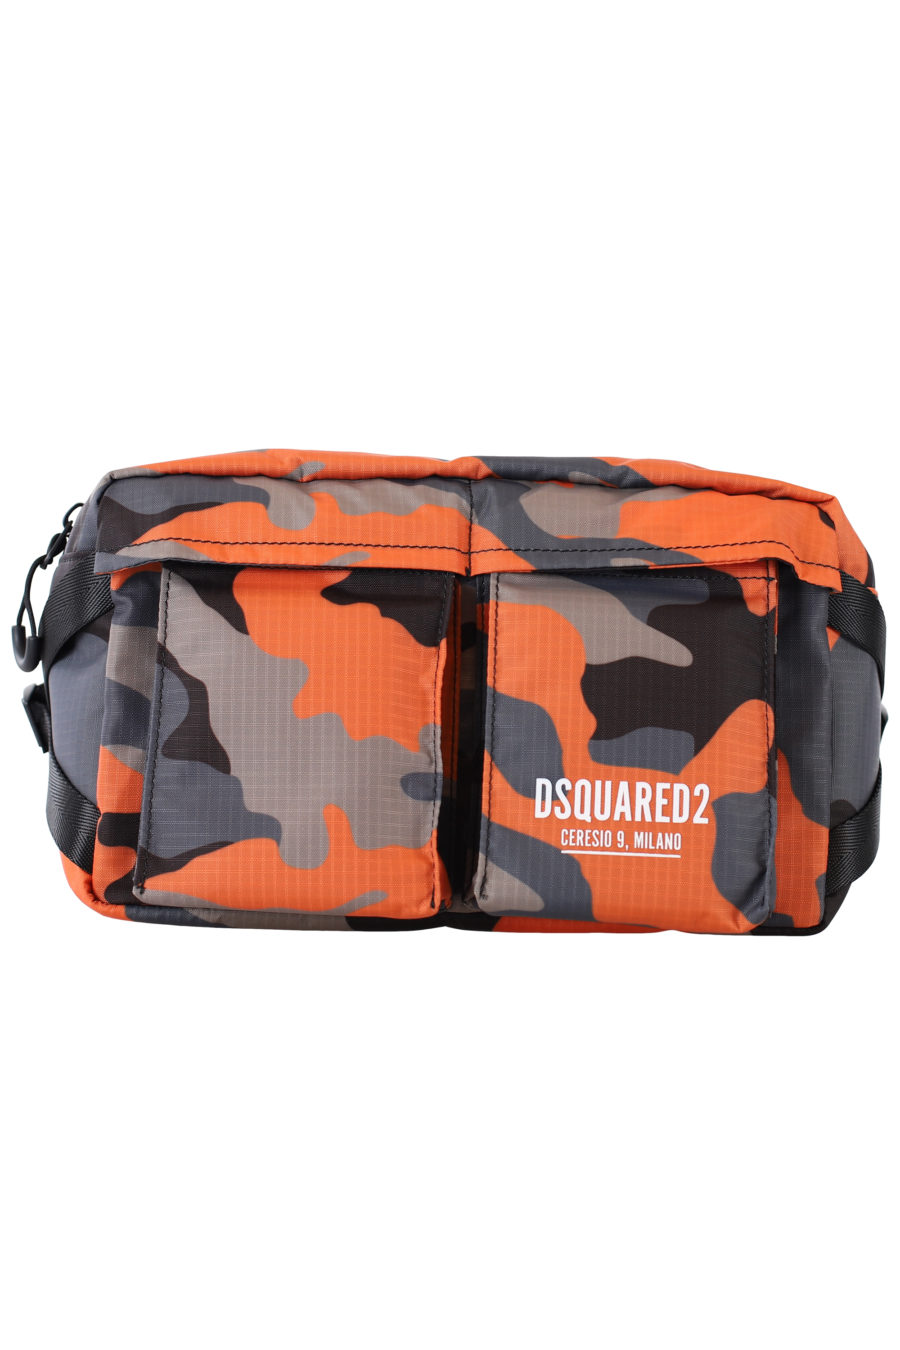 Crossbody briefcase with orange camouflage and ceresio logo - IMG 2278